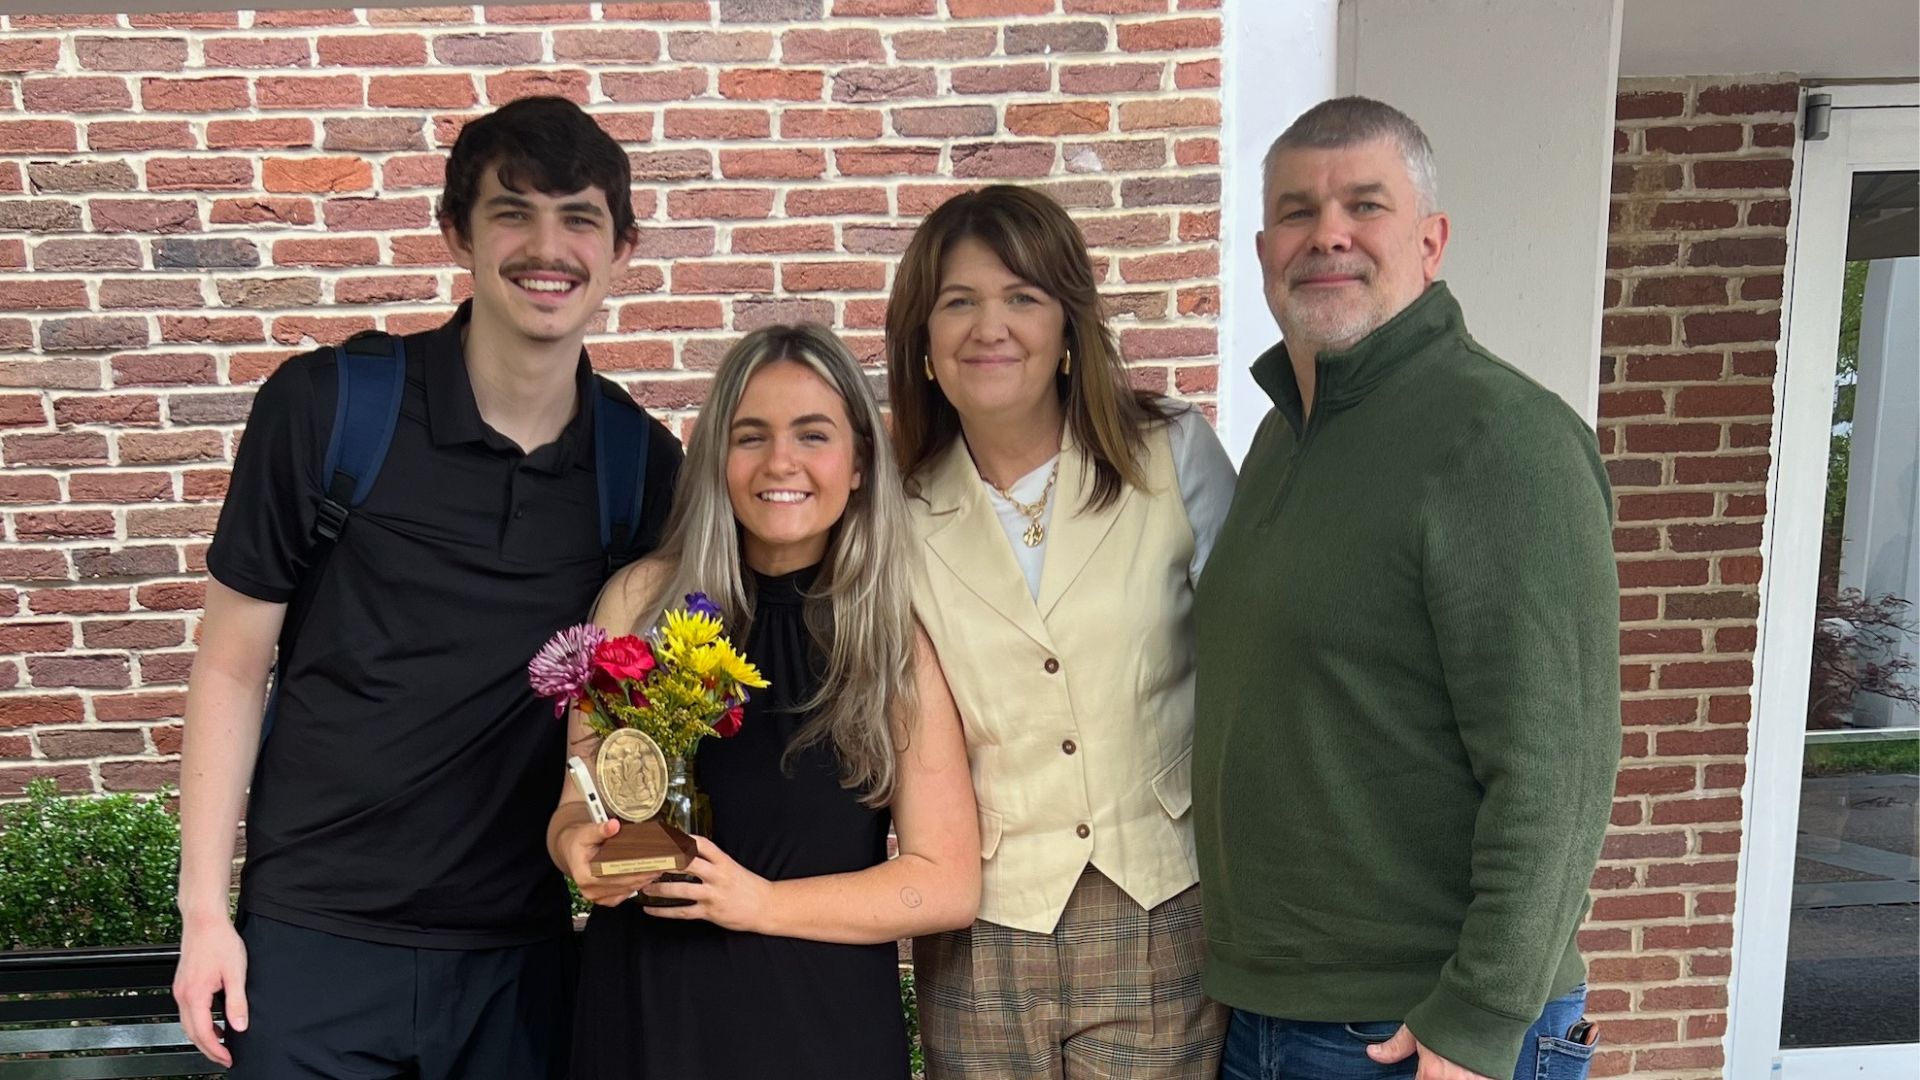 Deffendoll with her family and boyfriend after winning the Mary Mildreal Sullivan Award